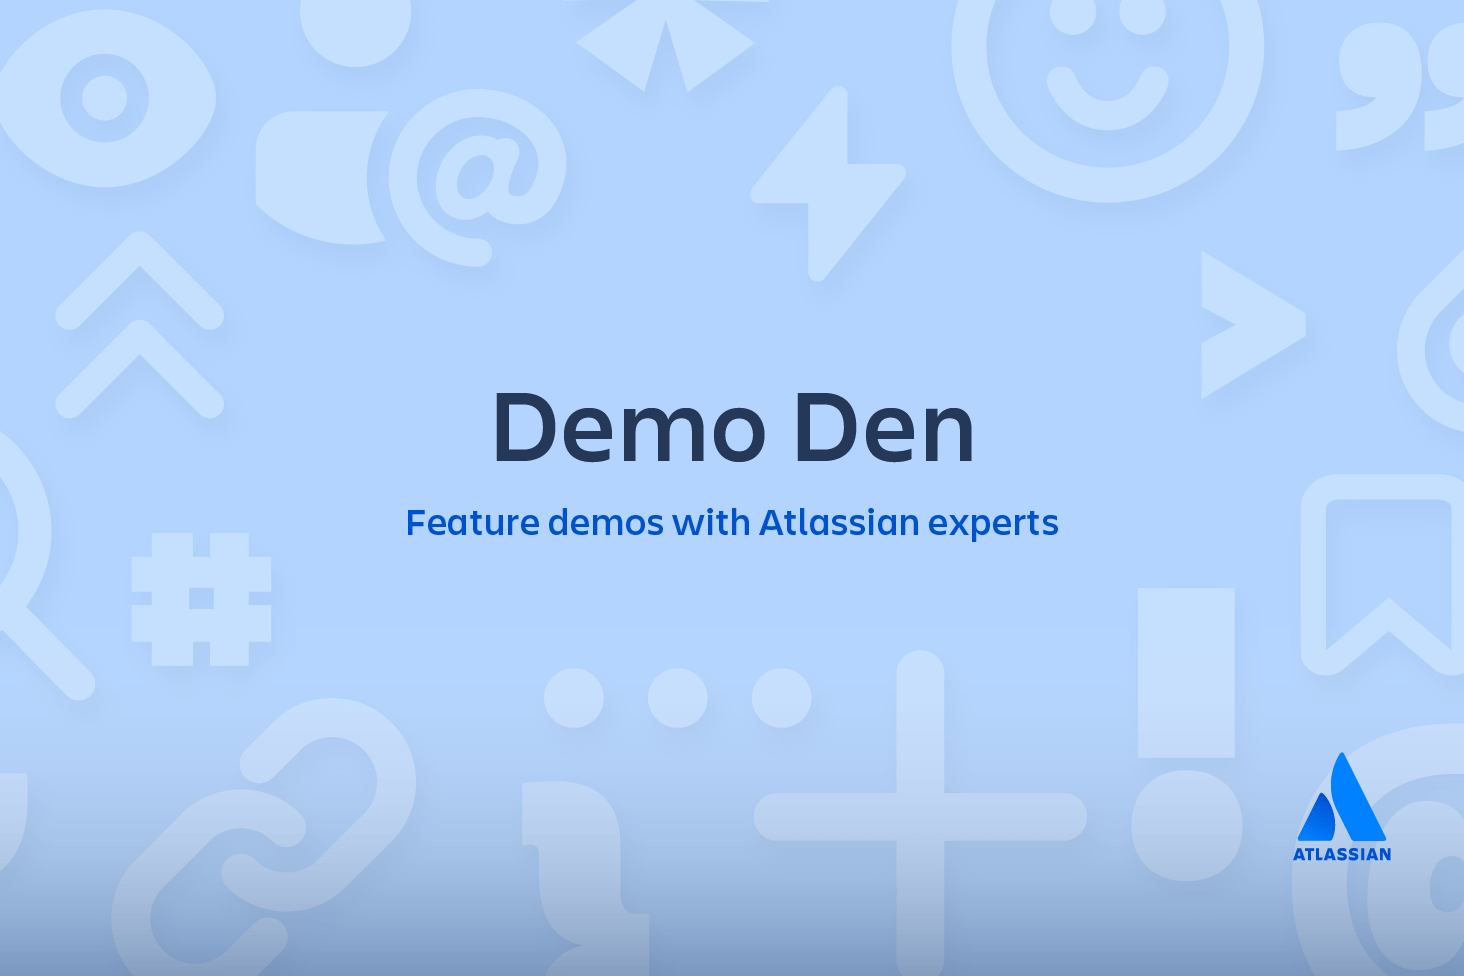 Demo Den Feature demos with Atlassian experts